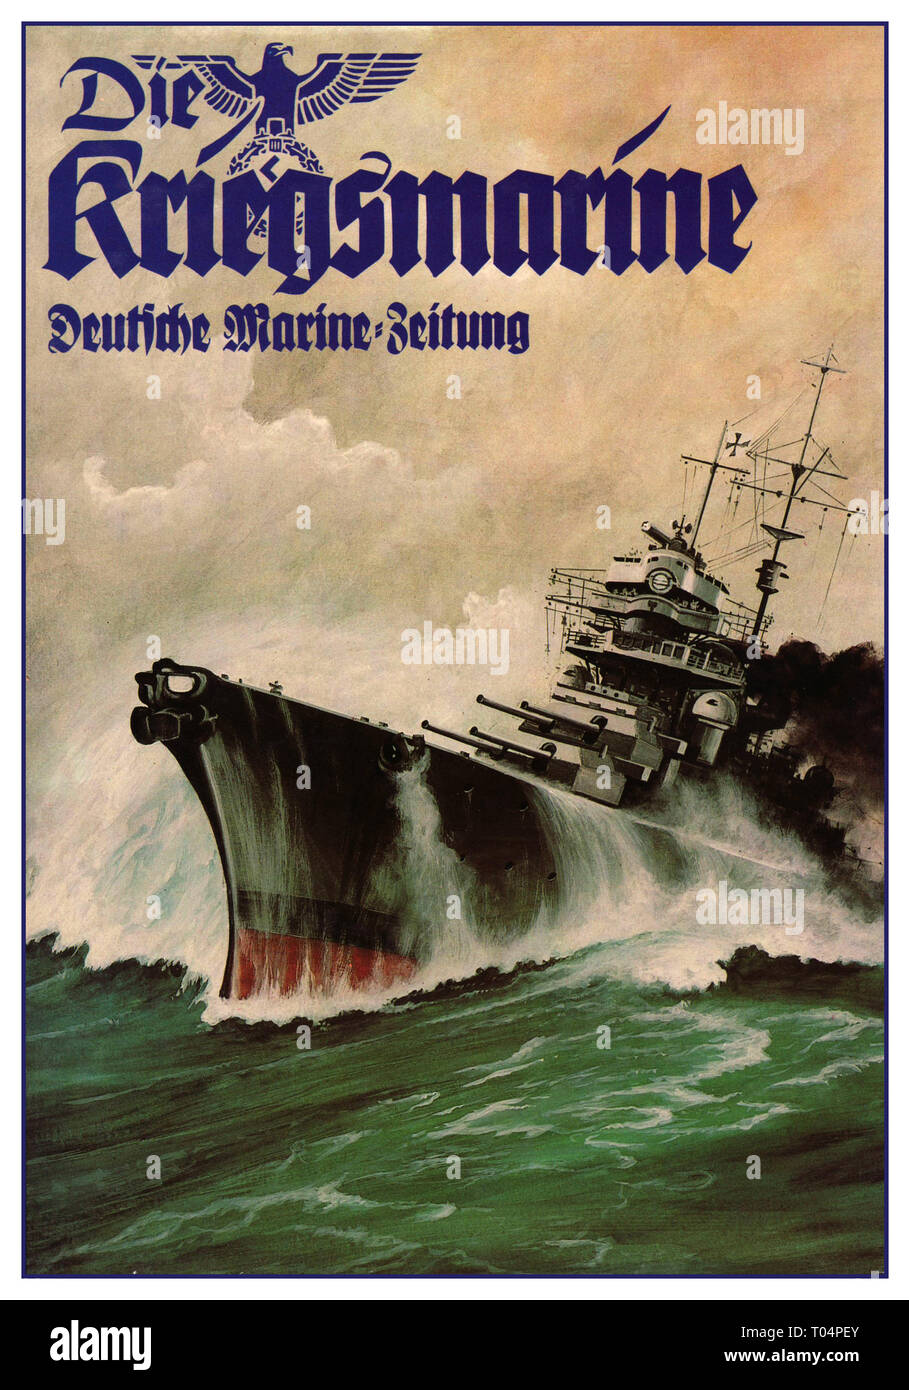 'The Kriegsmarine'  Nazi Germany Propaganda Magazine with German Eagle and Swastika on front cover The Kriegsmarine ' was a military magazine for the Kriegsmarine during WW2 Contents were the war of the sea, submarines, ships, the soldierly life of the German Navy, World War I, advertisements, novels, weapons, reports, sports and soldiers, theaters of war worldwide and the events of World War II from the end of 1939. Stock Photo